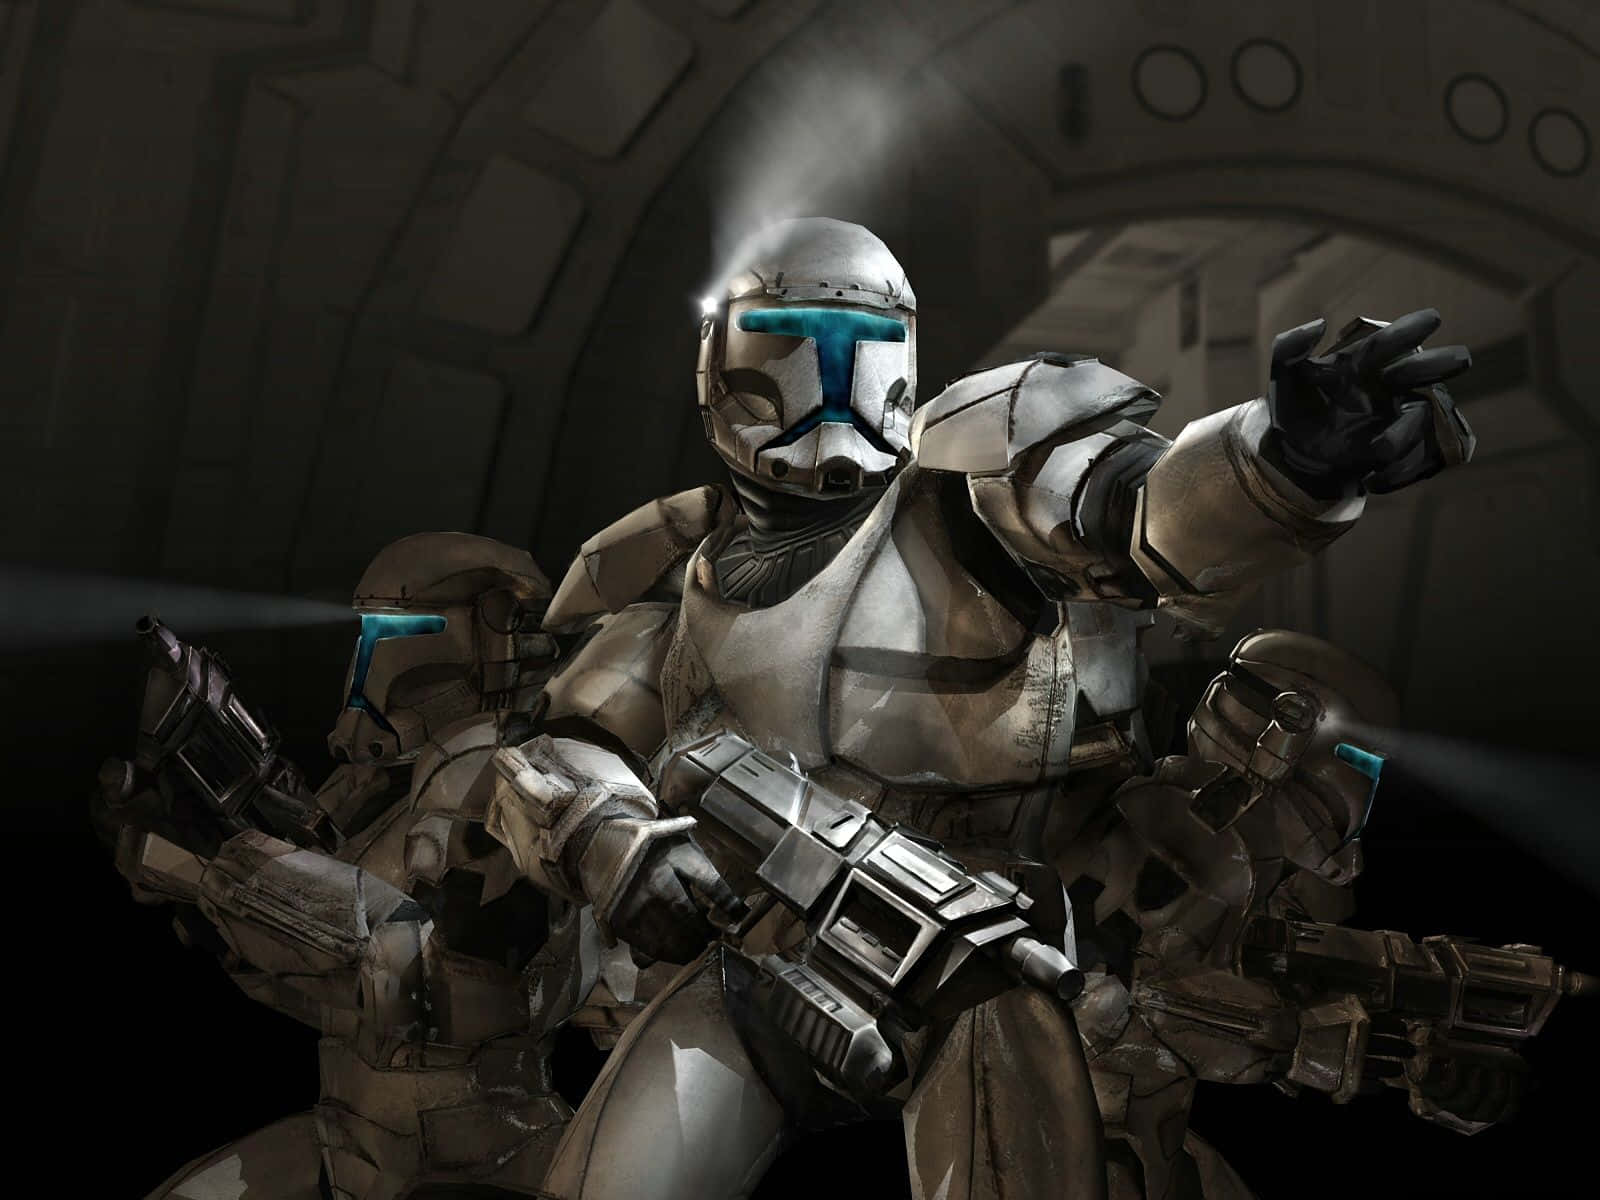 "Armor Up! Ready the Star Wars Clone Troopers!" Wallpaper